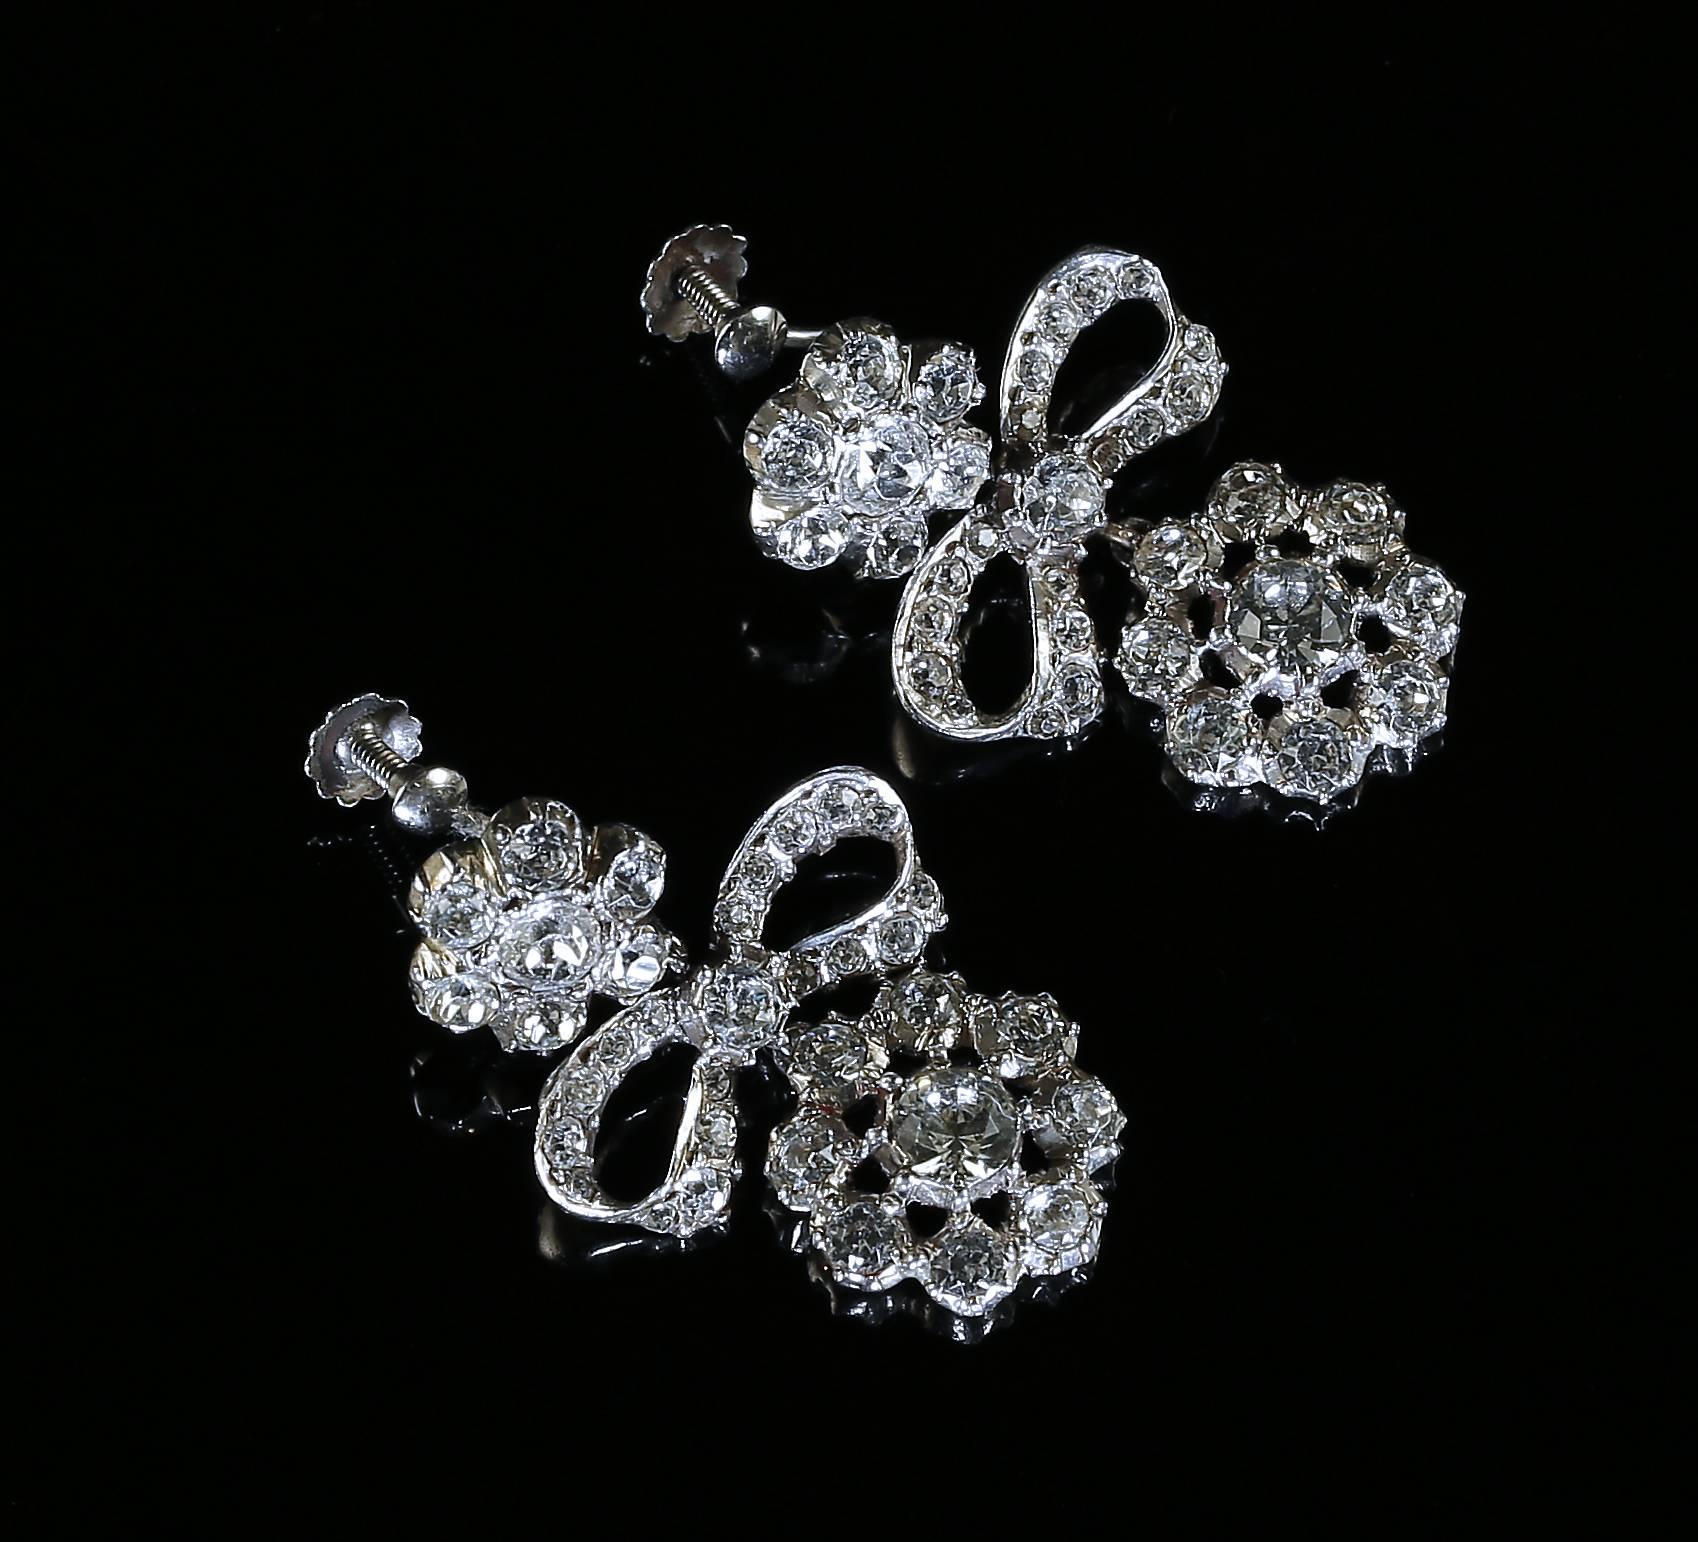 These fabulous Georgian Antique Sterling Silver earrings are set with beautiful Old Cut Paste 

They have superb workmanship and lovely detail from the Georgian Era Steeped in English history and recently purchased in London. 

Hallmarked Sil for